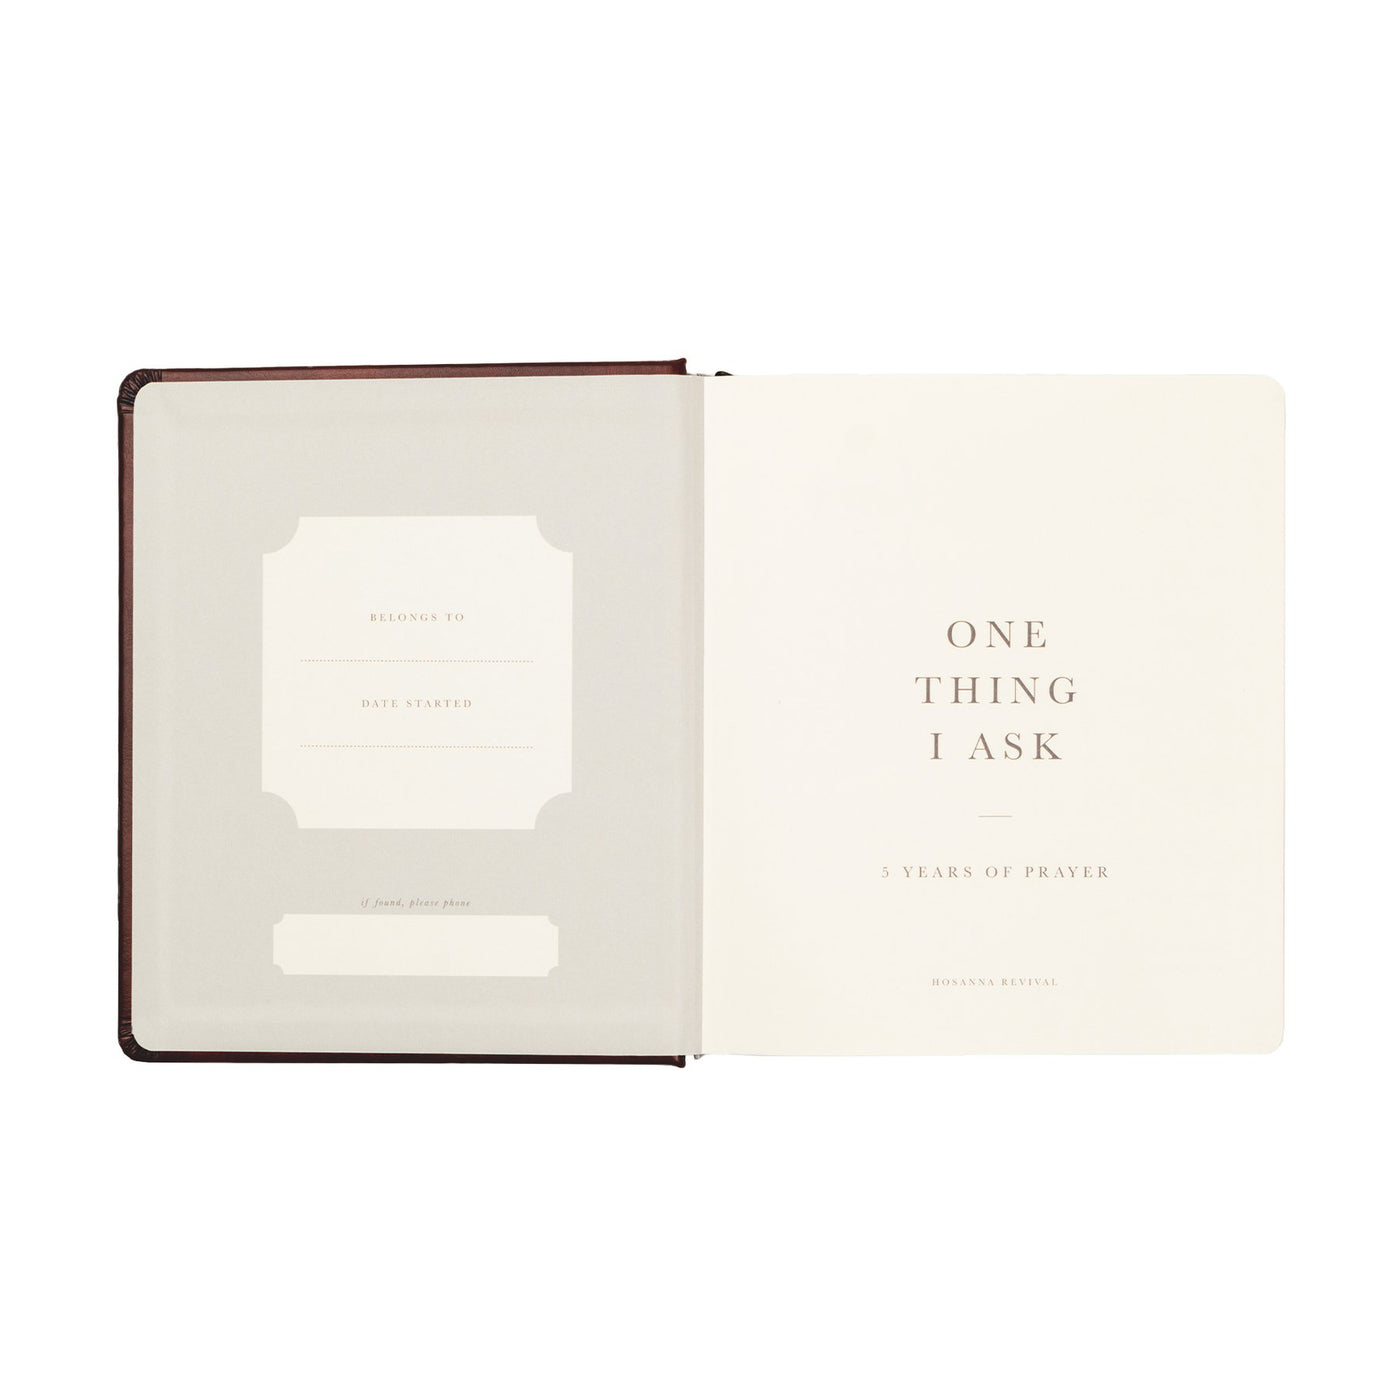 Hosanna Revival Five Year Prayer Journal - One Thing I Ask - Stockholm Theme Interior